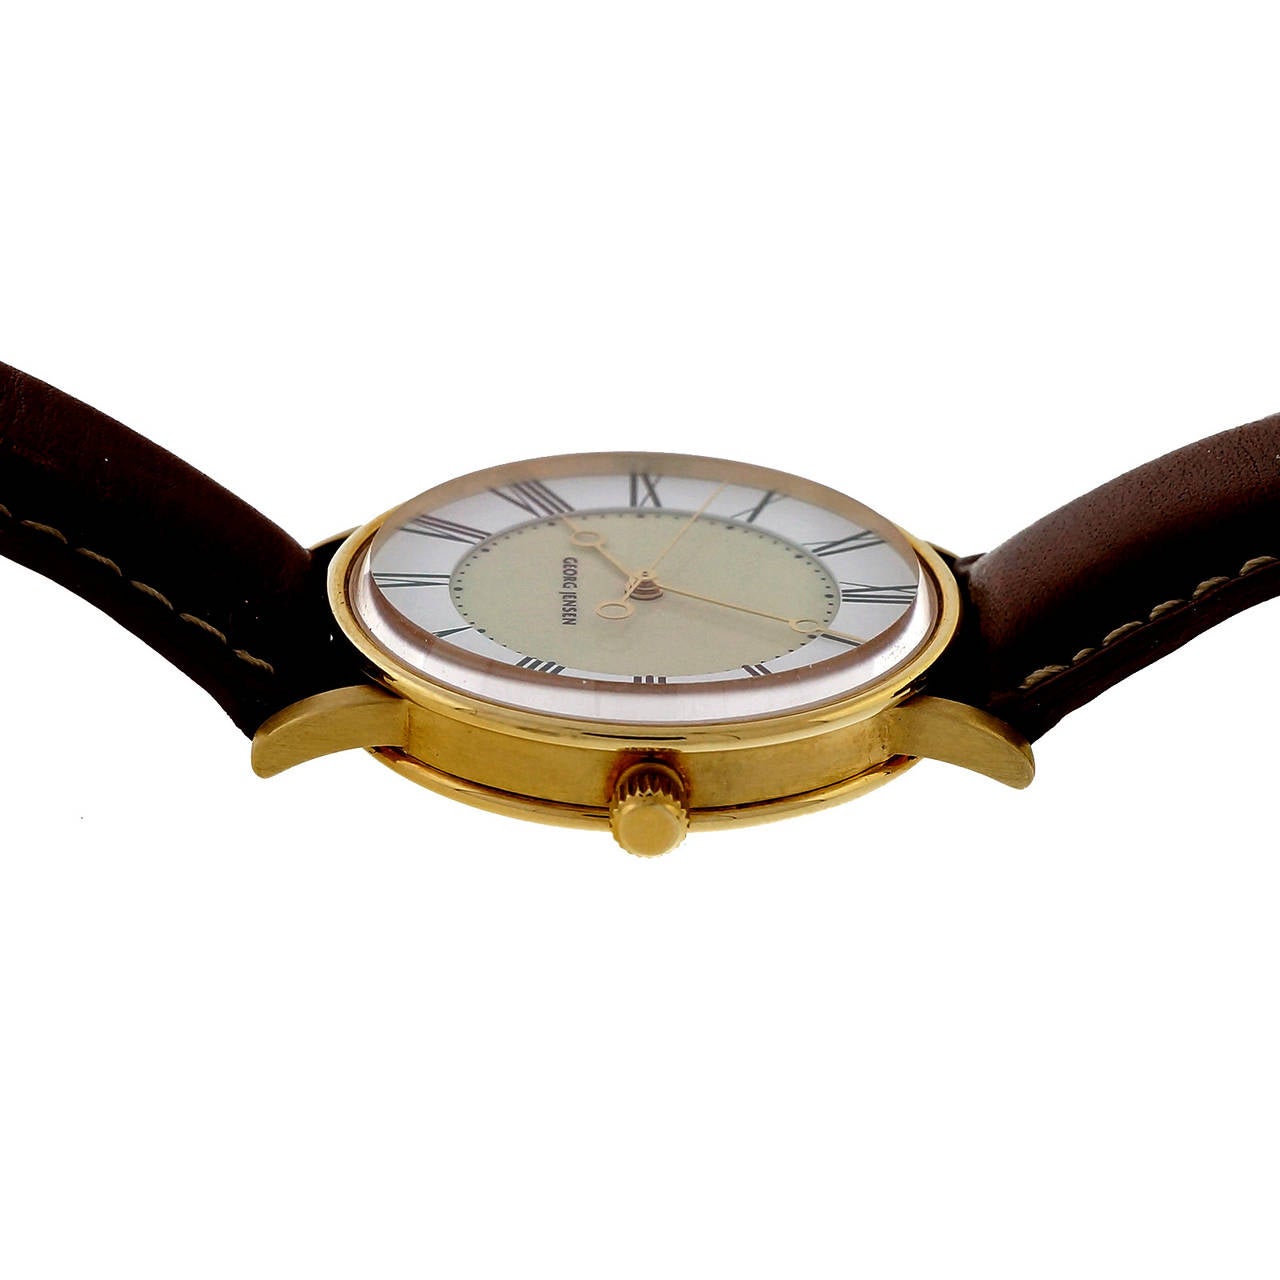 Two tone Georg Jensen self-wind classic wrist watch in solid 18k yellow gold.

52.6 grams
18k yellow gold
Width without crown: 34.37mm
Width with crown: 36.99mm
Band width at case: 19mm
Case thickness: 9.24mm
Band: Original Georg Jensen –